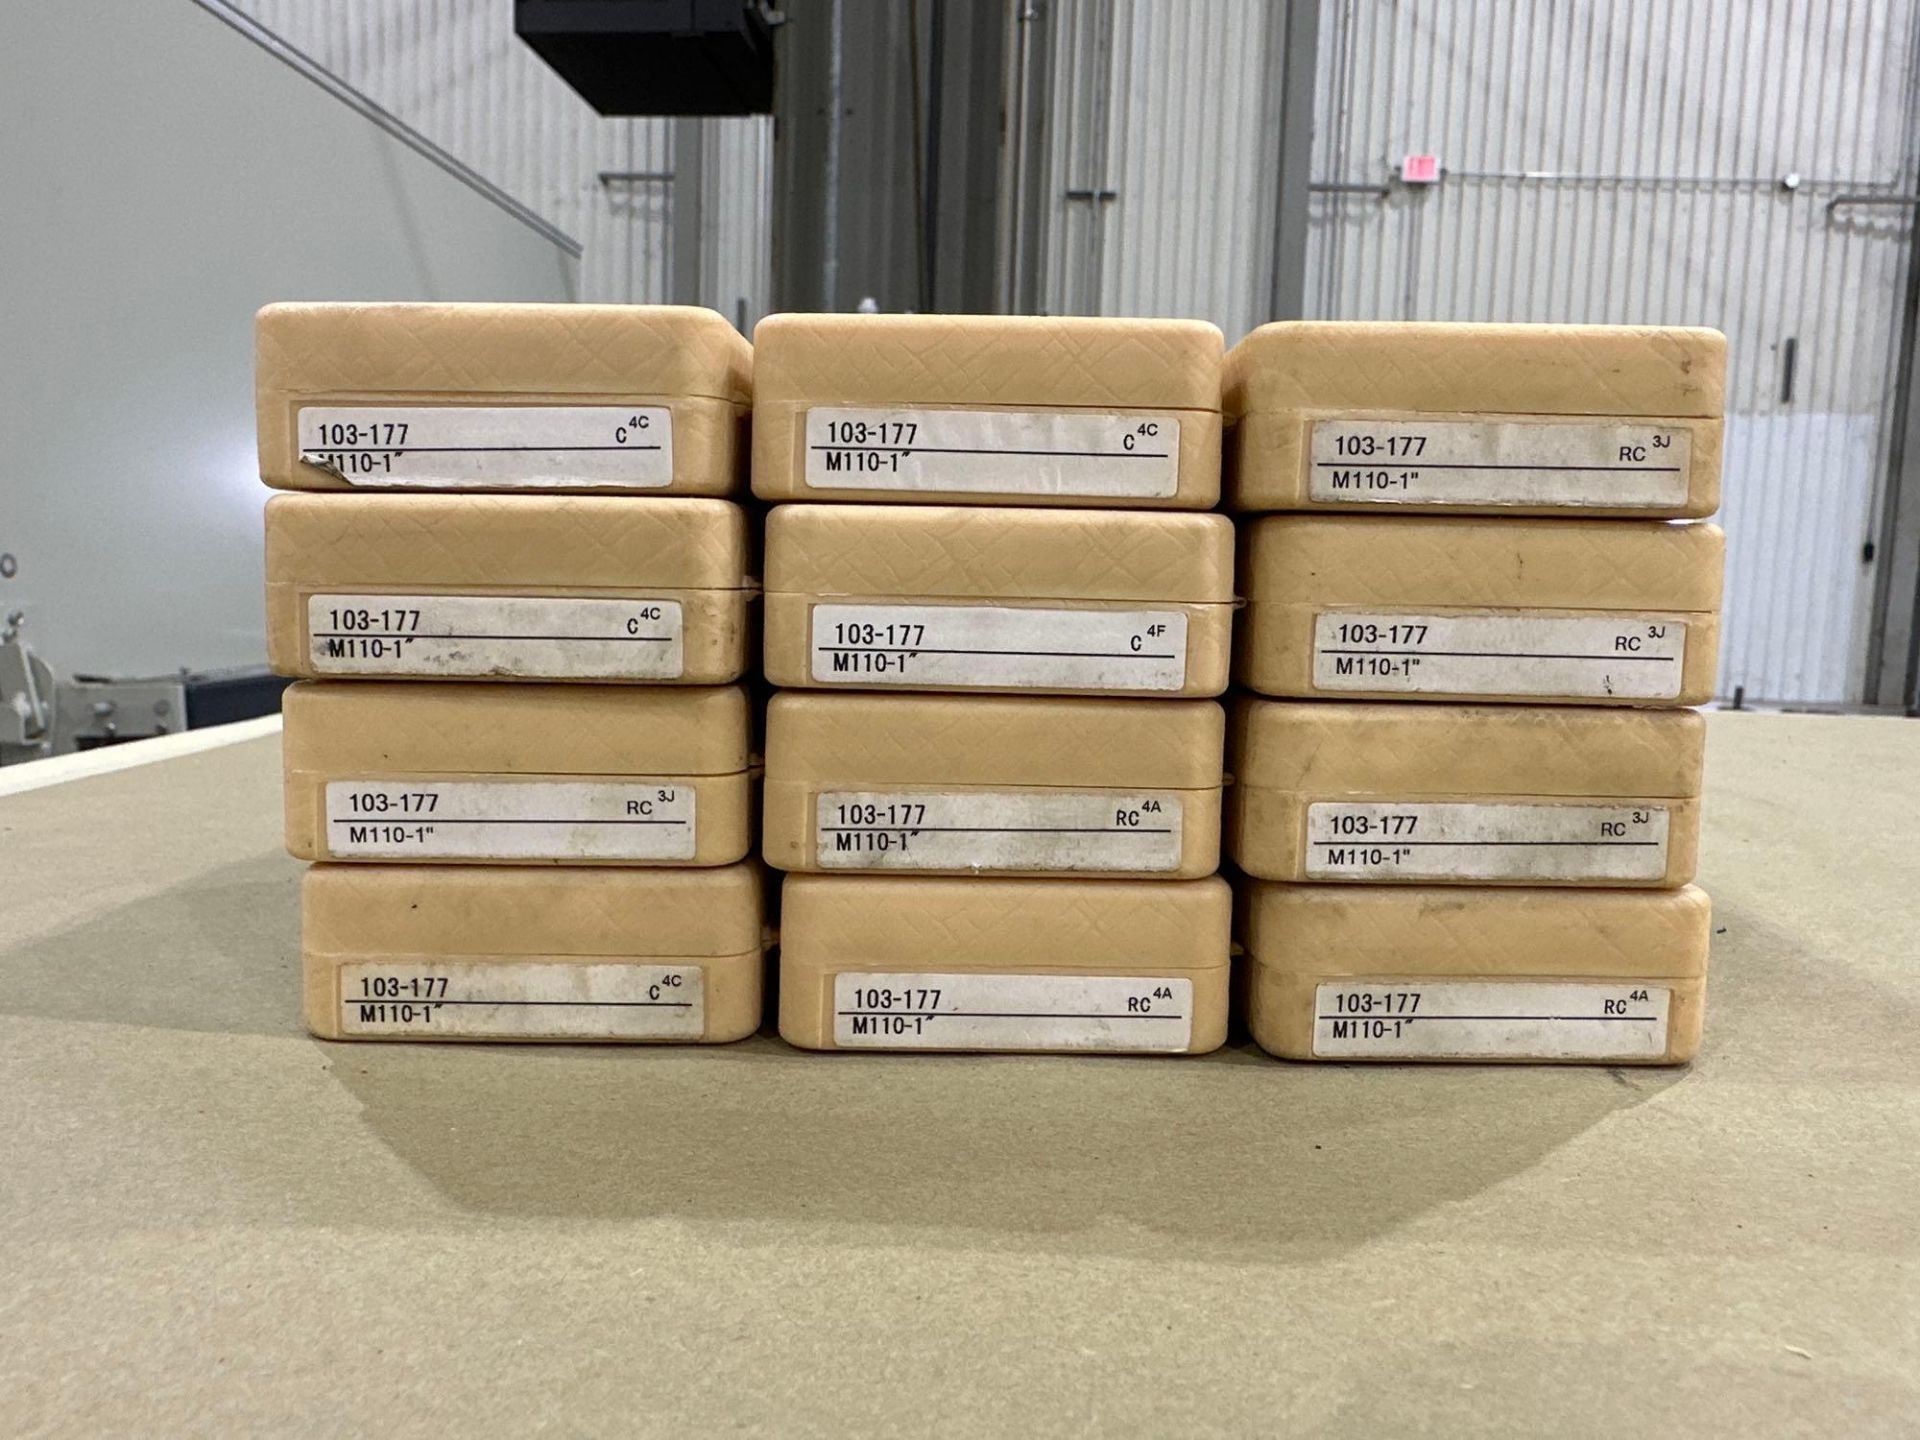 Lot of 12: Mitutoyo Mechanical OD Micrometer M110-1”, 0-1” Range, .001” Graduation, in plastic boxes - Image 3 of 6